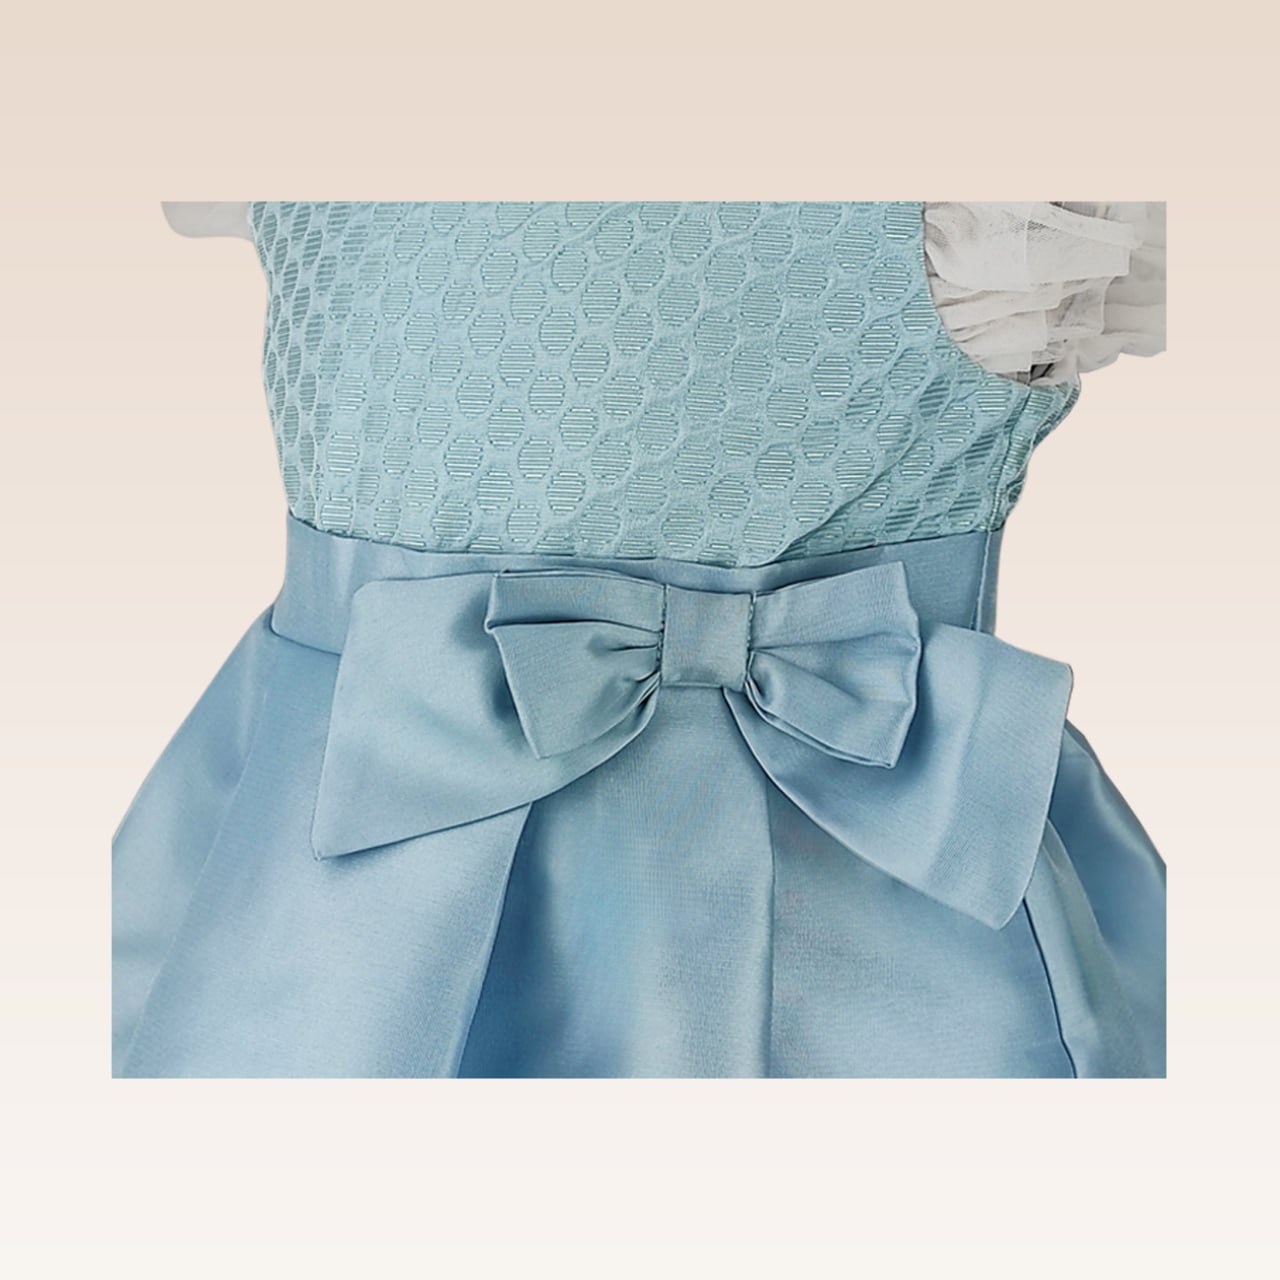 Beatrice Light Blue in Textured Material and Tulle Sleeves Party Dress with Bag Set